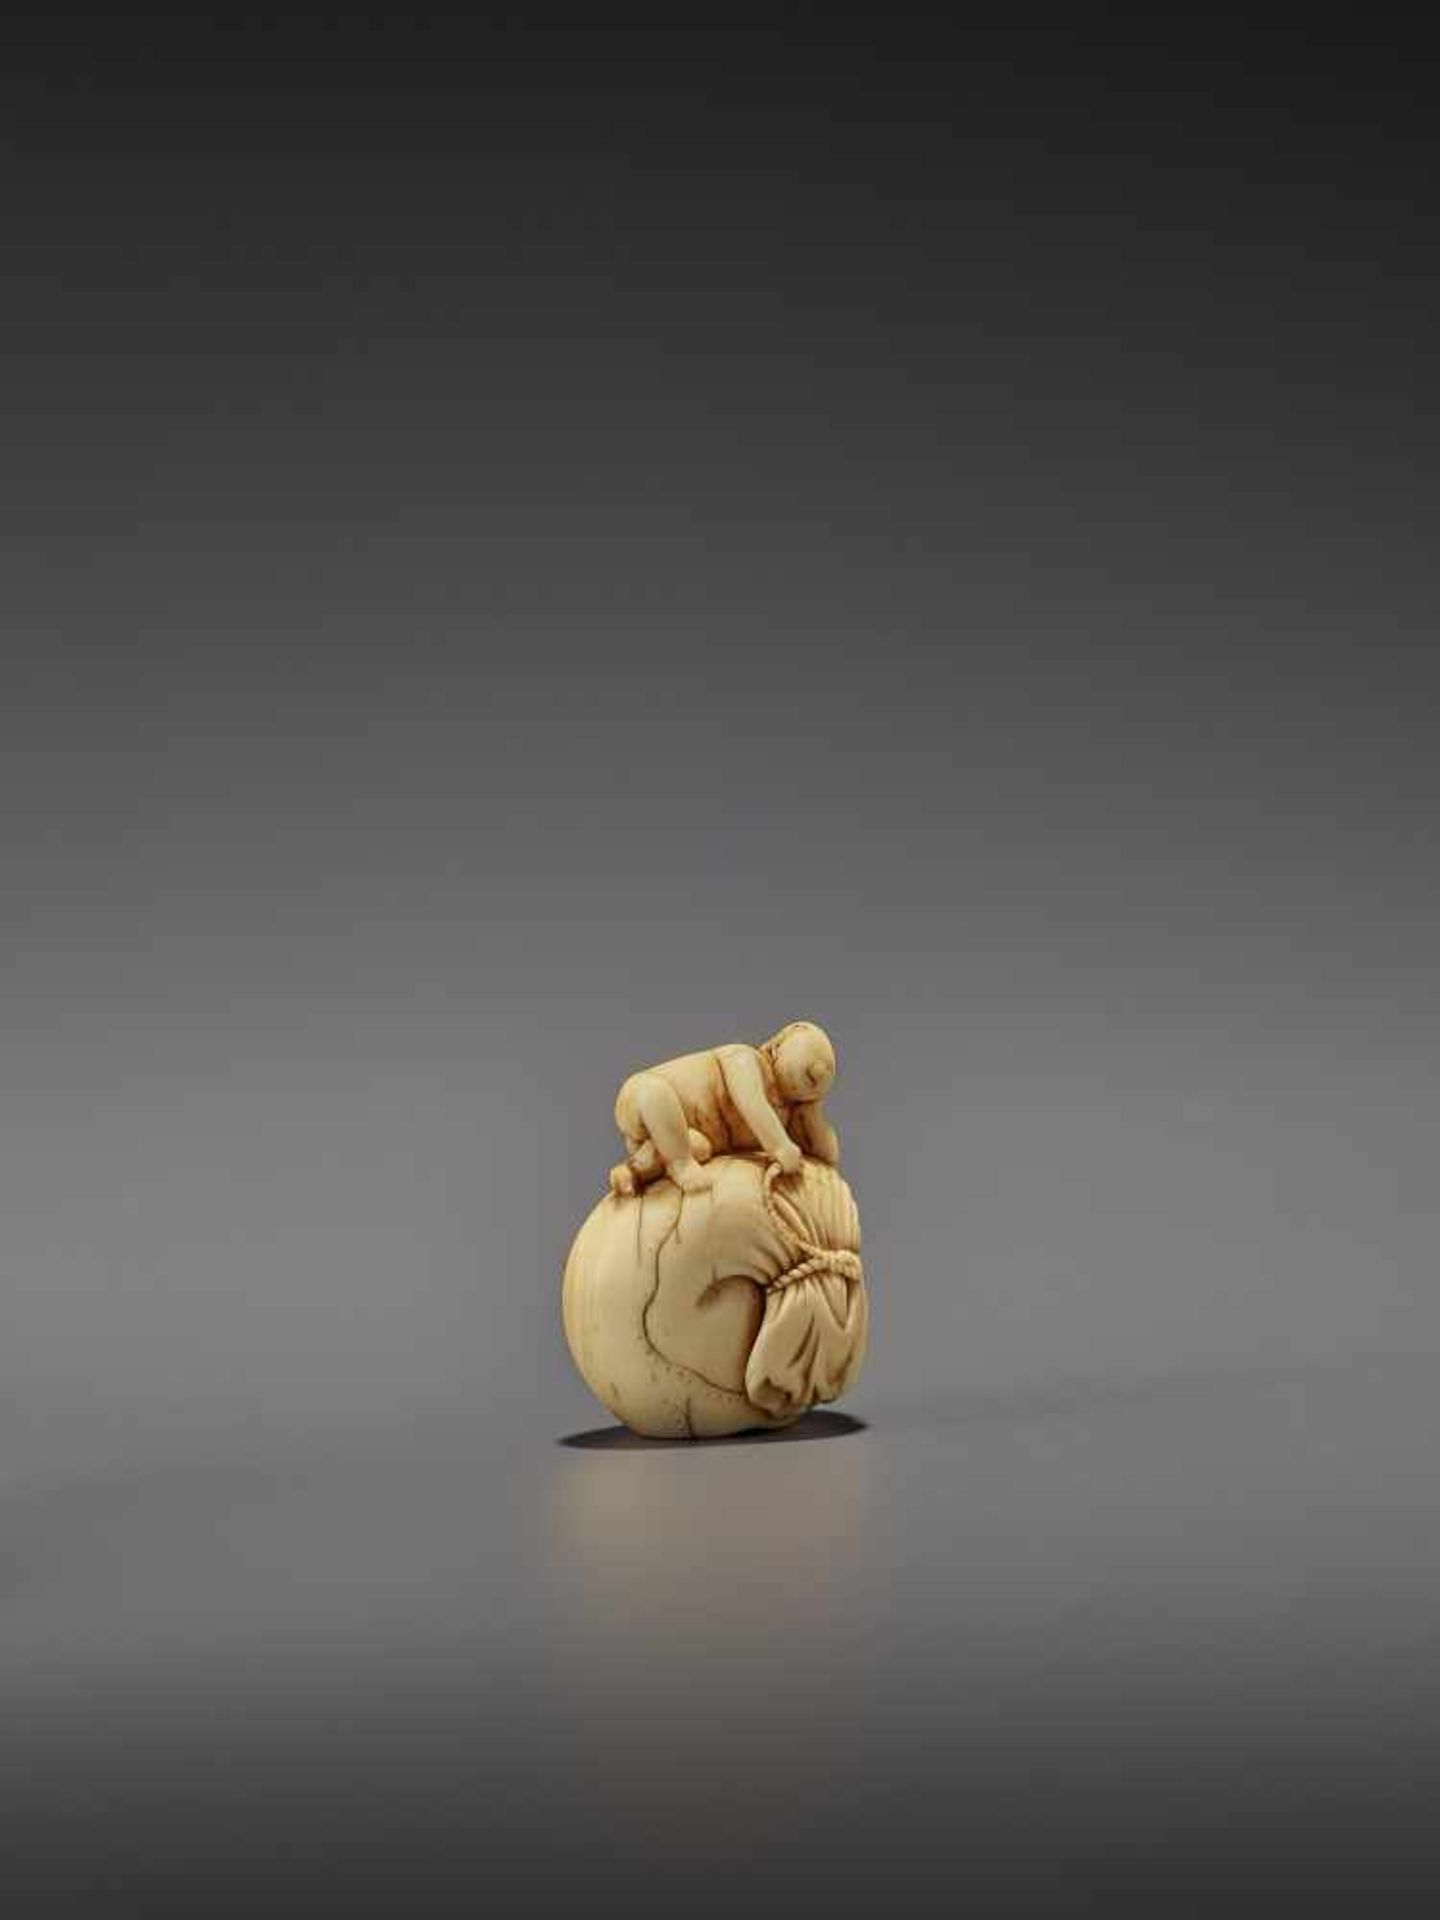 AN EARLY IVORY NETSUKE OF A NAKED MAN SLEEPING ON A BAG UnsignedJapan, mid-18th century, Edo - Image 6 of 8